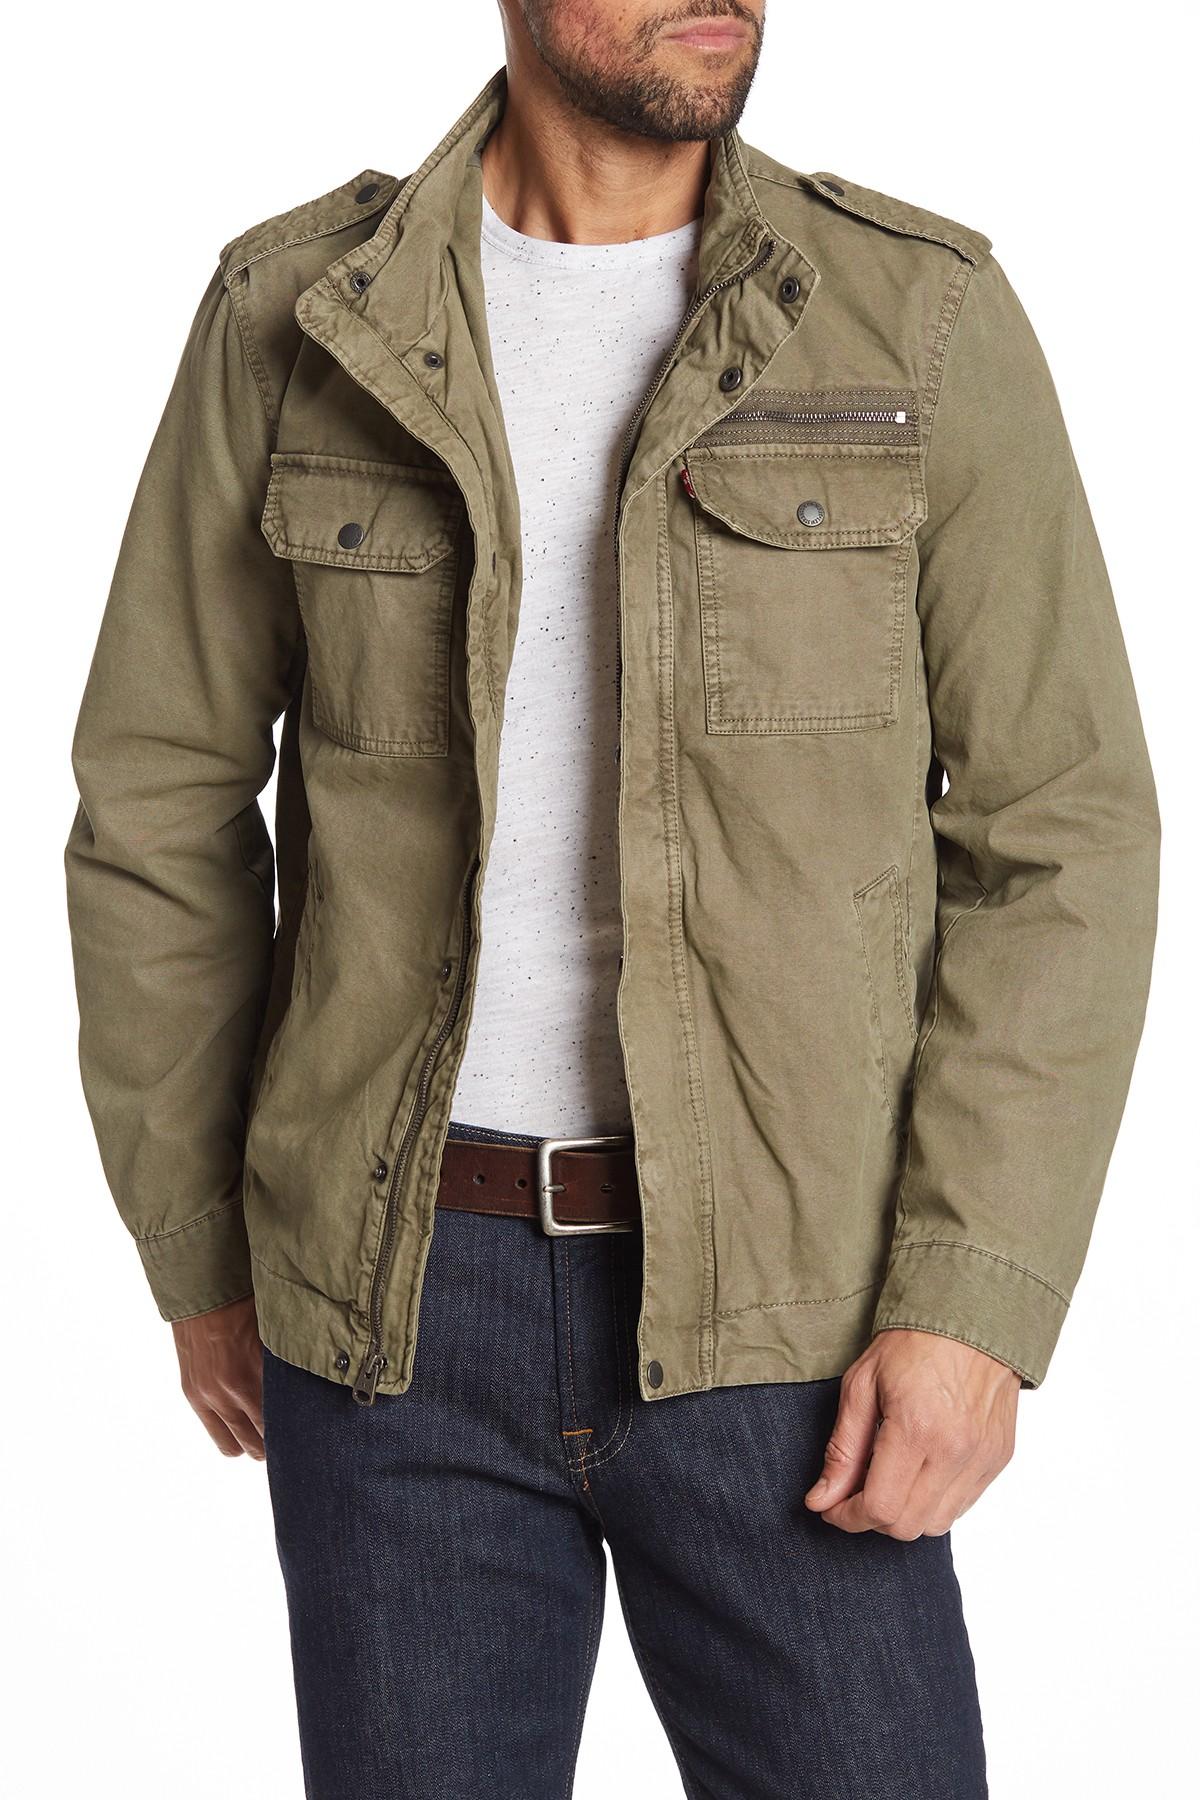 Levi's Reverse Twill Military Jacket in Green for Men - Lyst